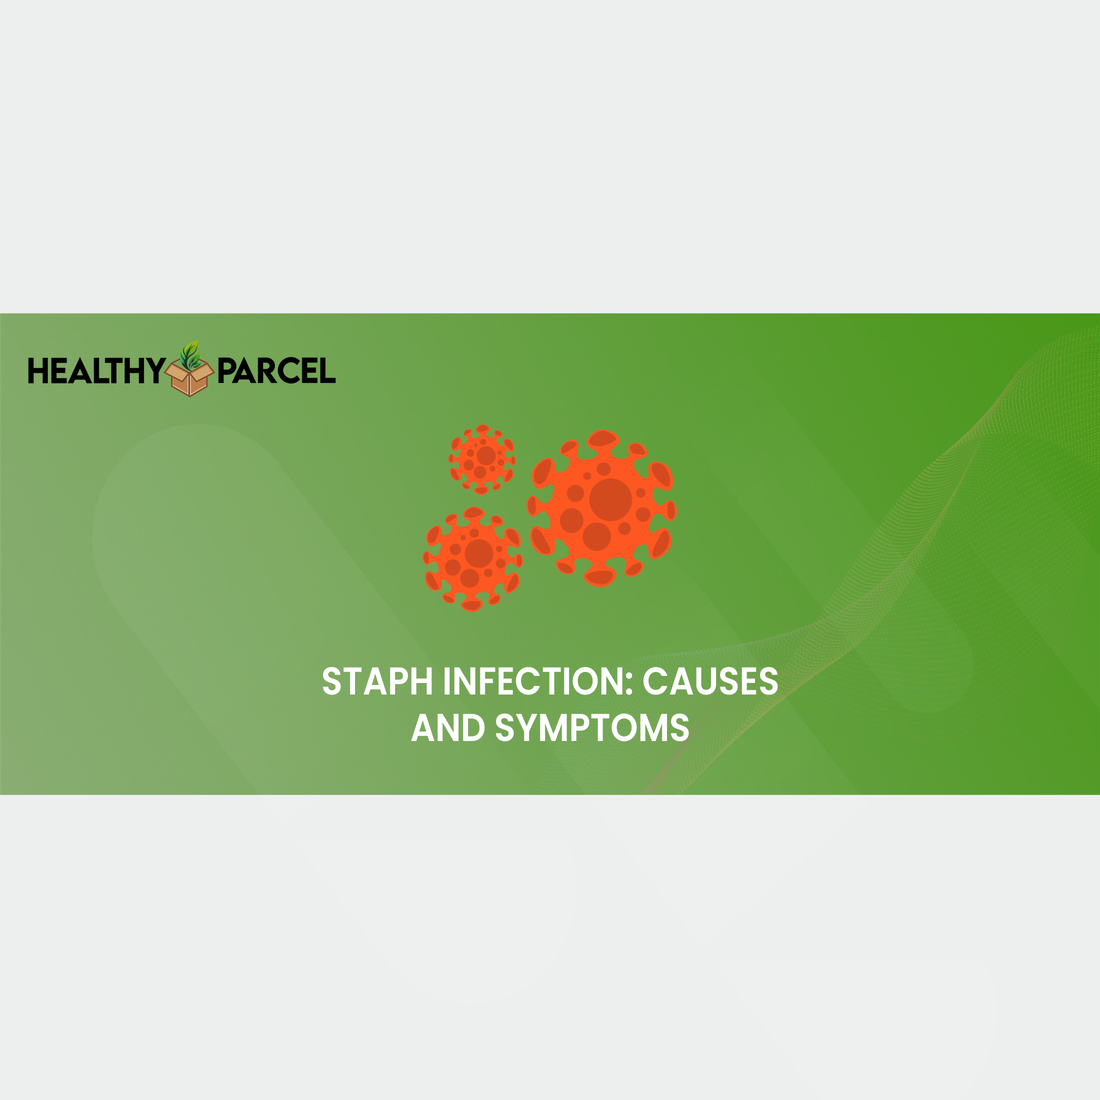 Staph Infection Causes and Symptoms